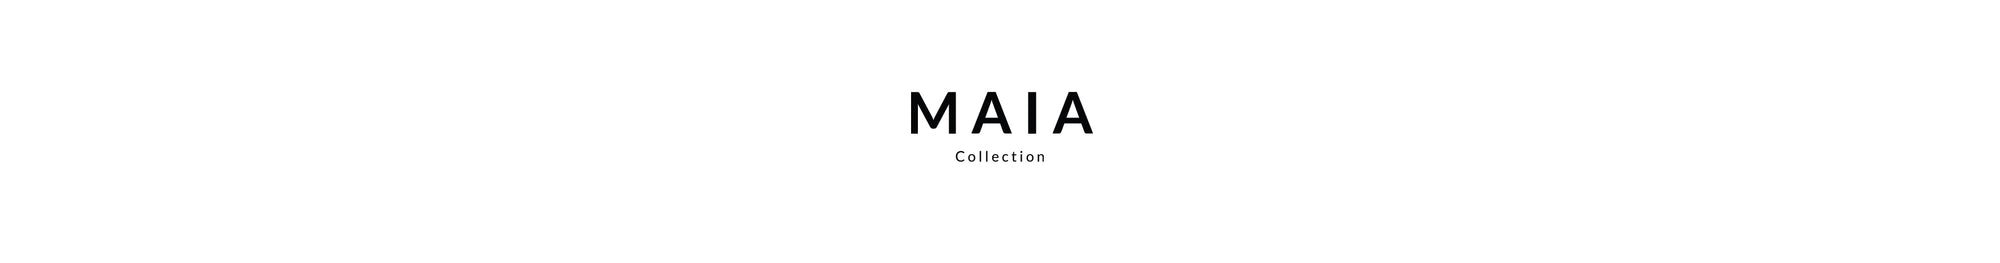 MAIA Collection